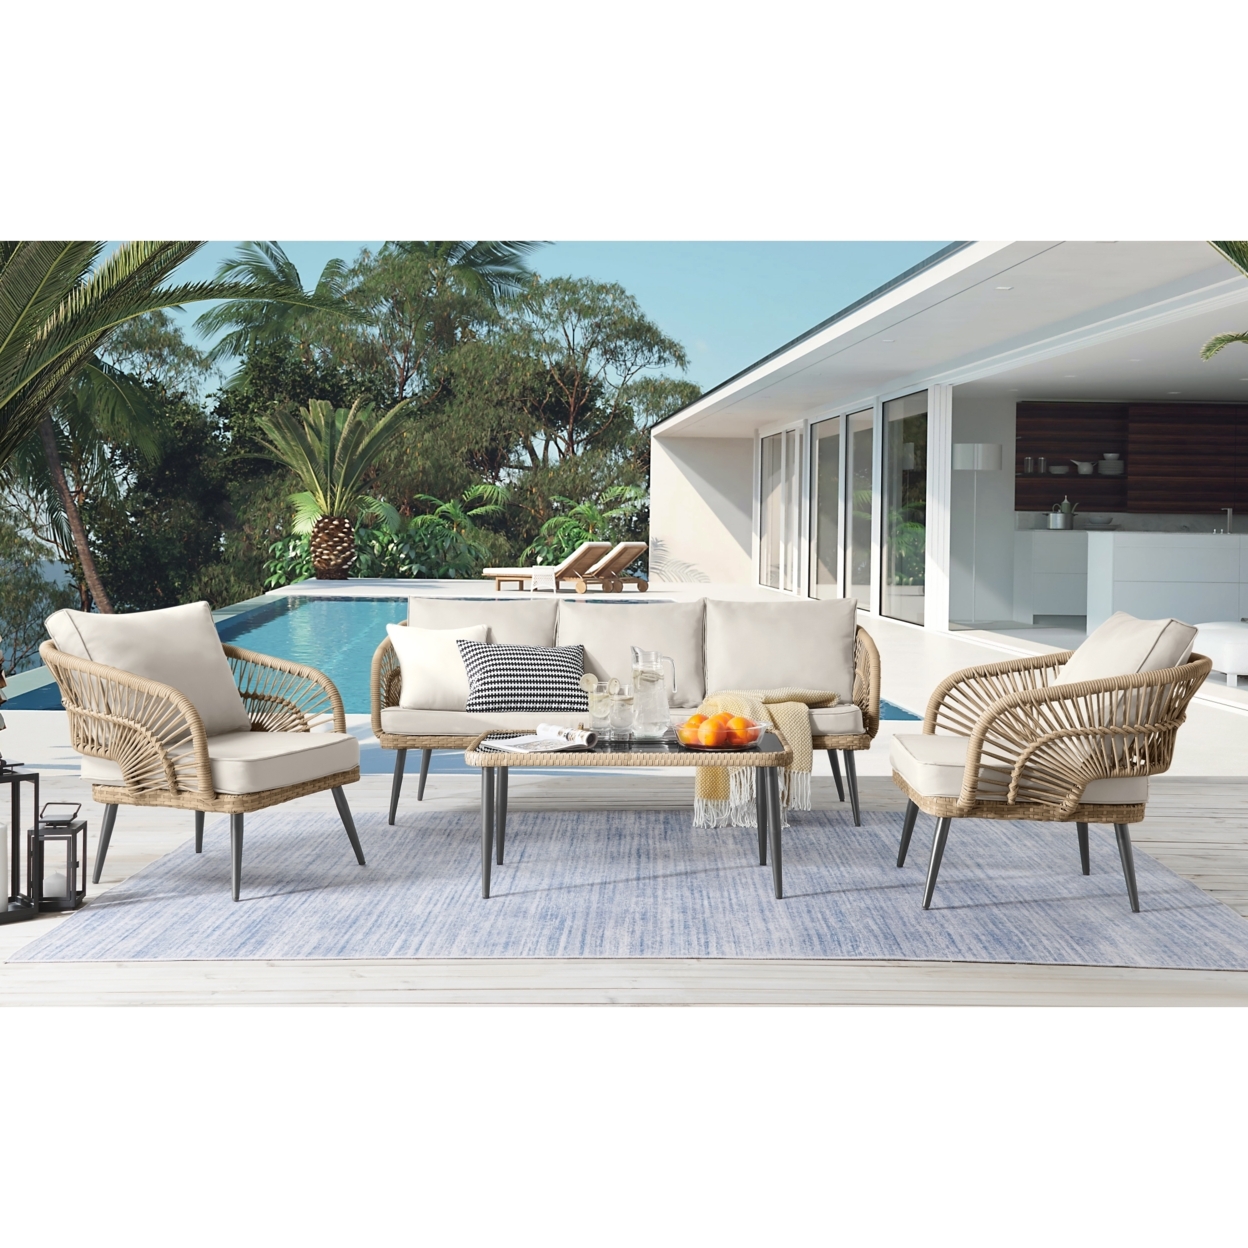 Javien Outdoor Set -All-Weather Faux Rattan Wicker Design, Removable And Washable Cushions - Teak/5 Seating